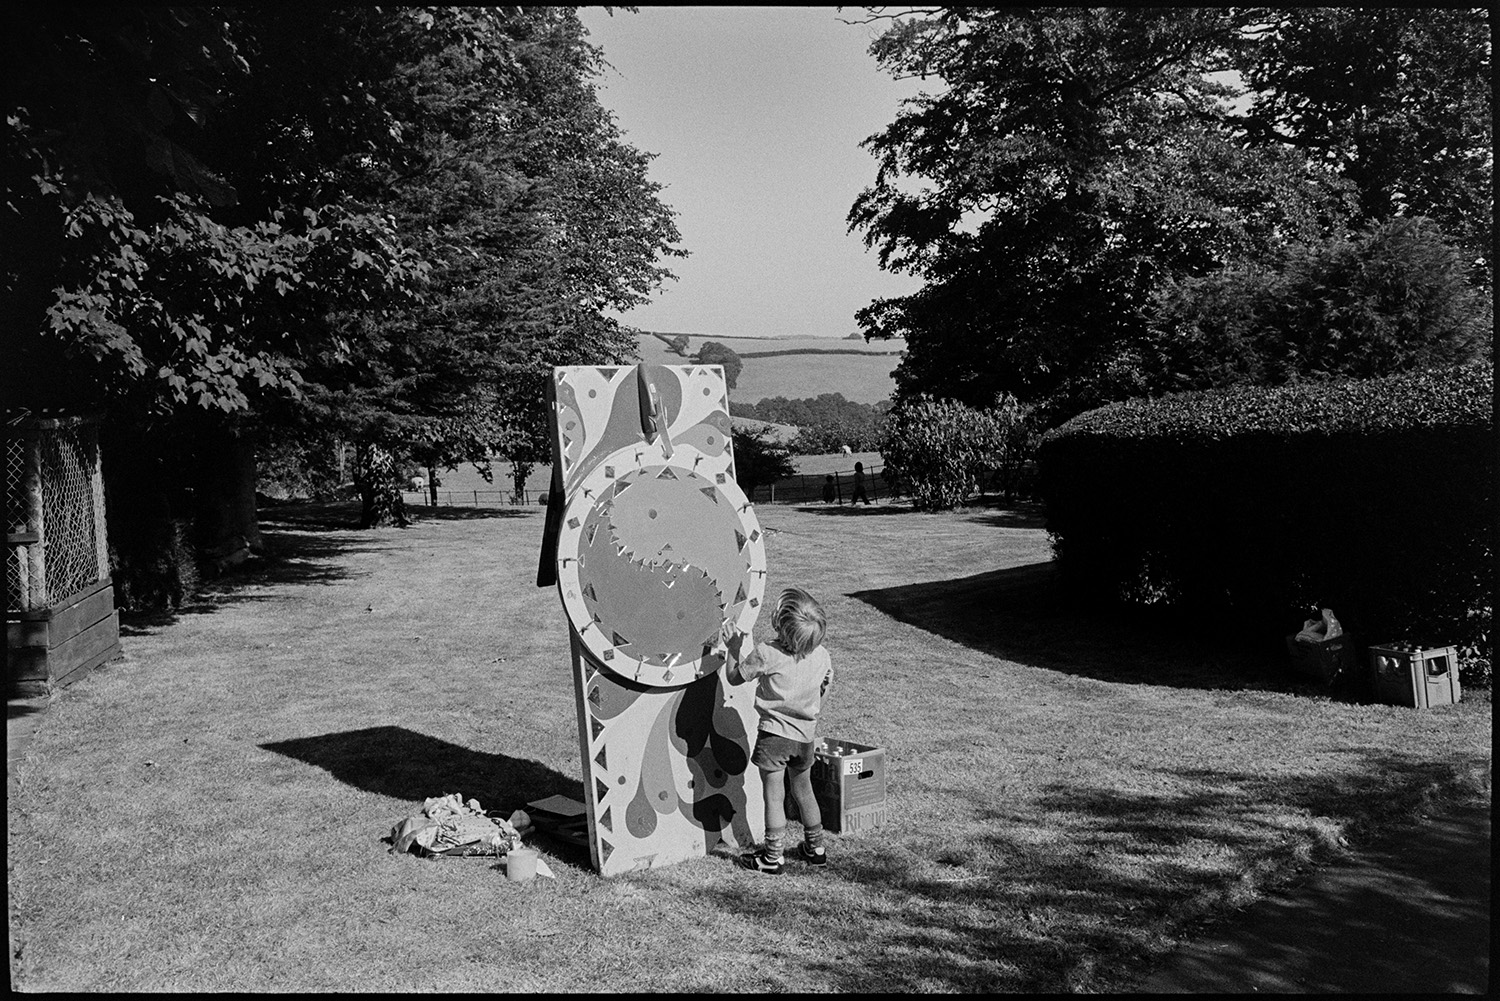 Blacksmith demonstrating at fete, wheel of fortune. 
[A child spinning a 'wheel of fortune' game in a field at a fete.]